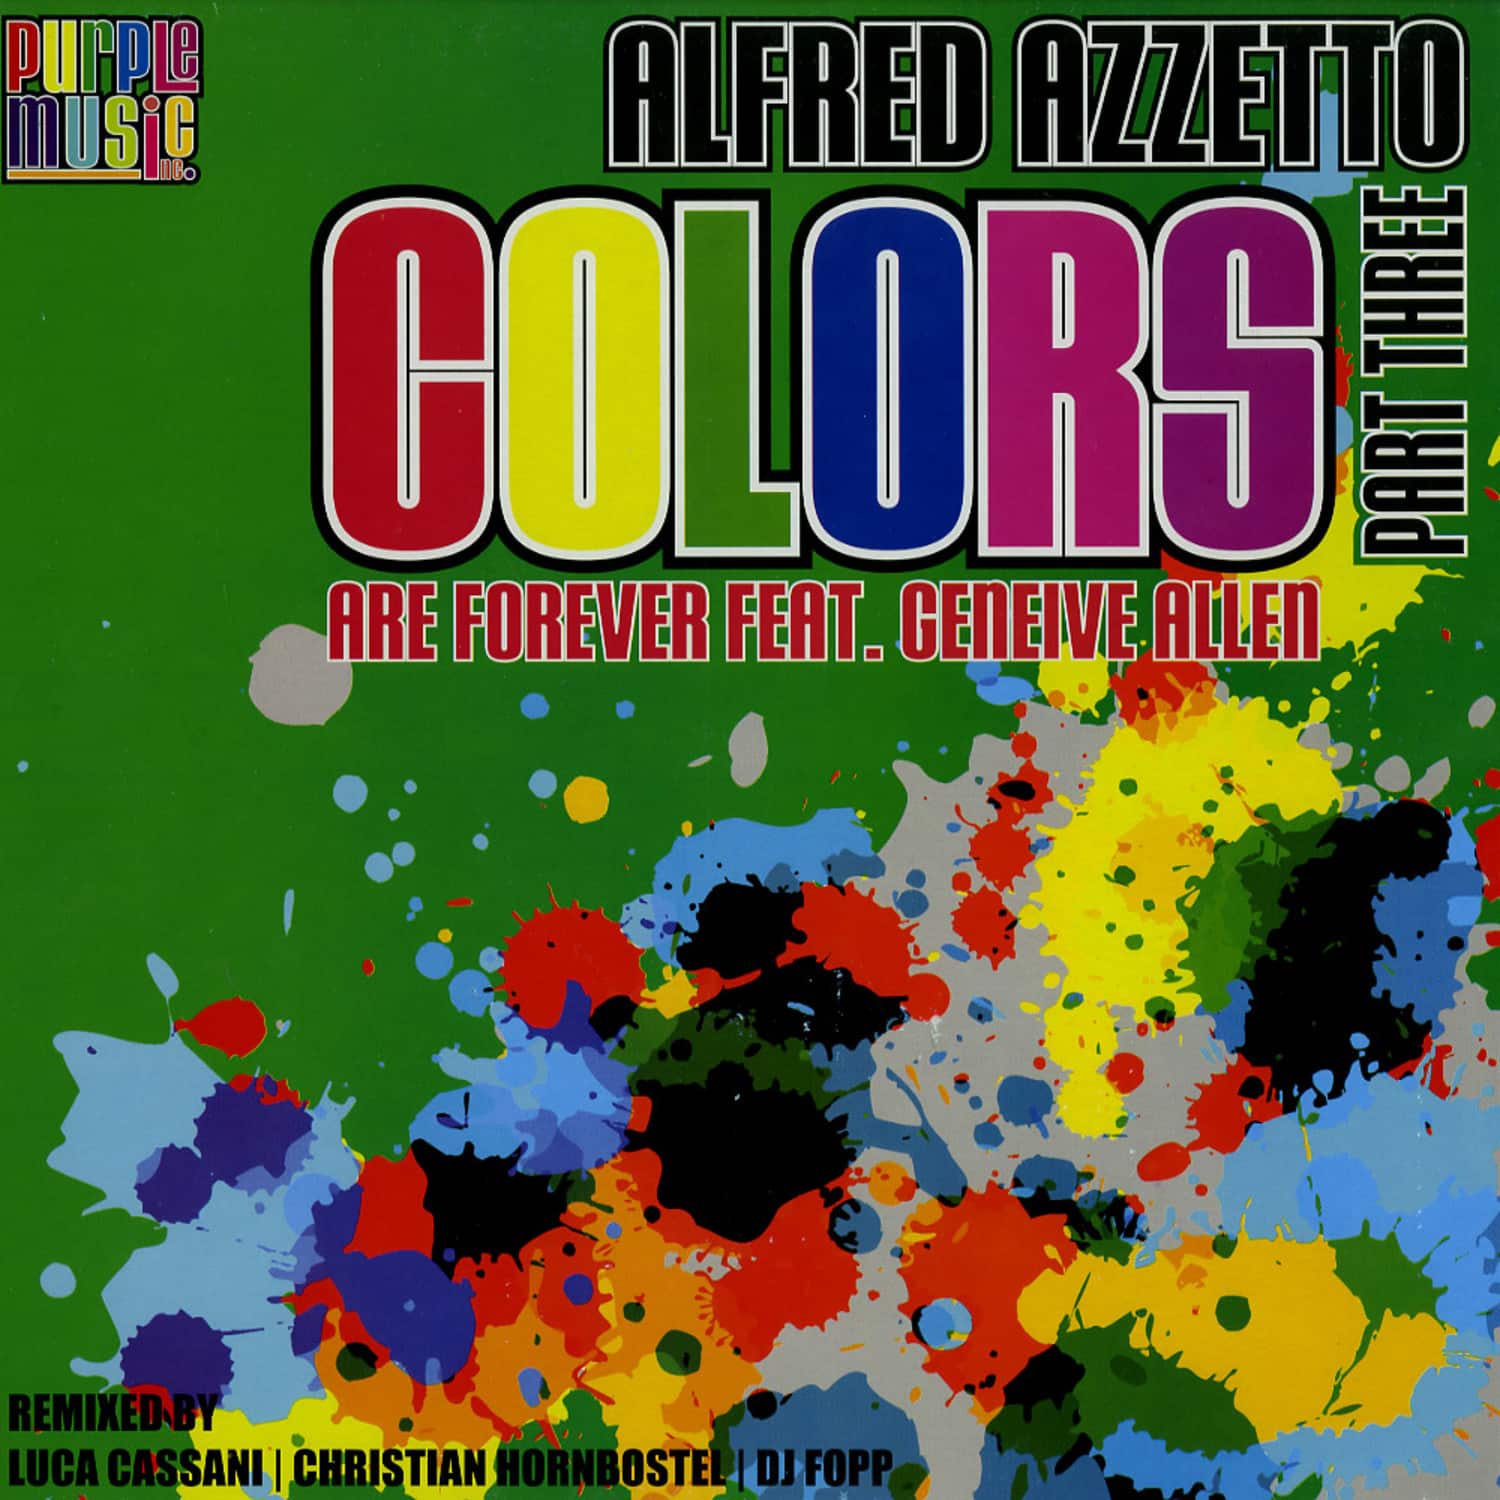 Alfred Azzetto feat. Geneiva Allen - COLORS ARE FOREVER - PART 3